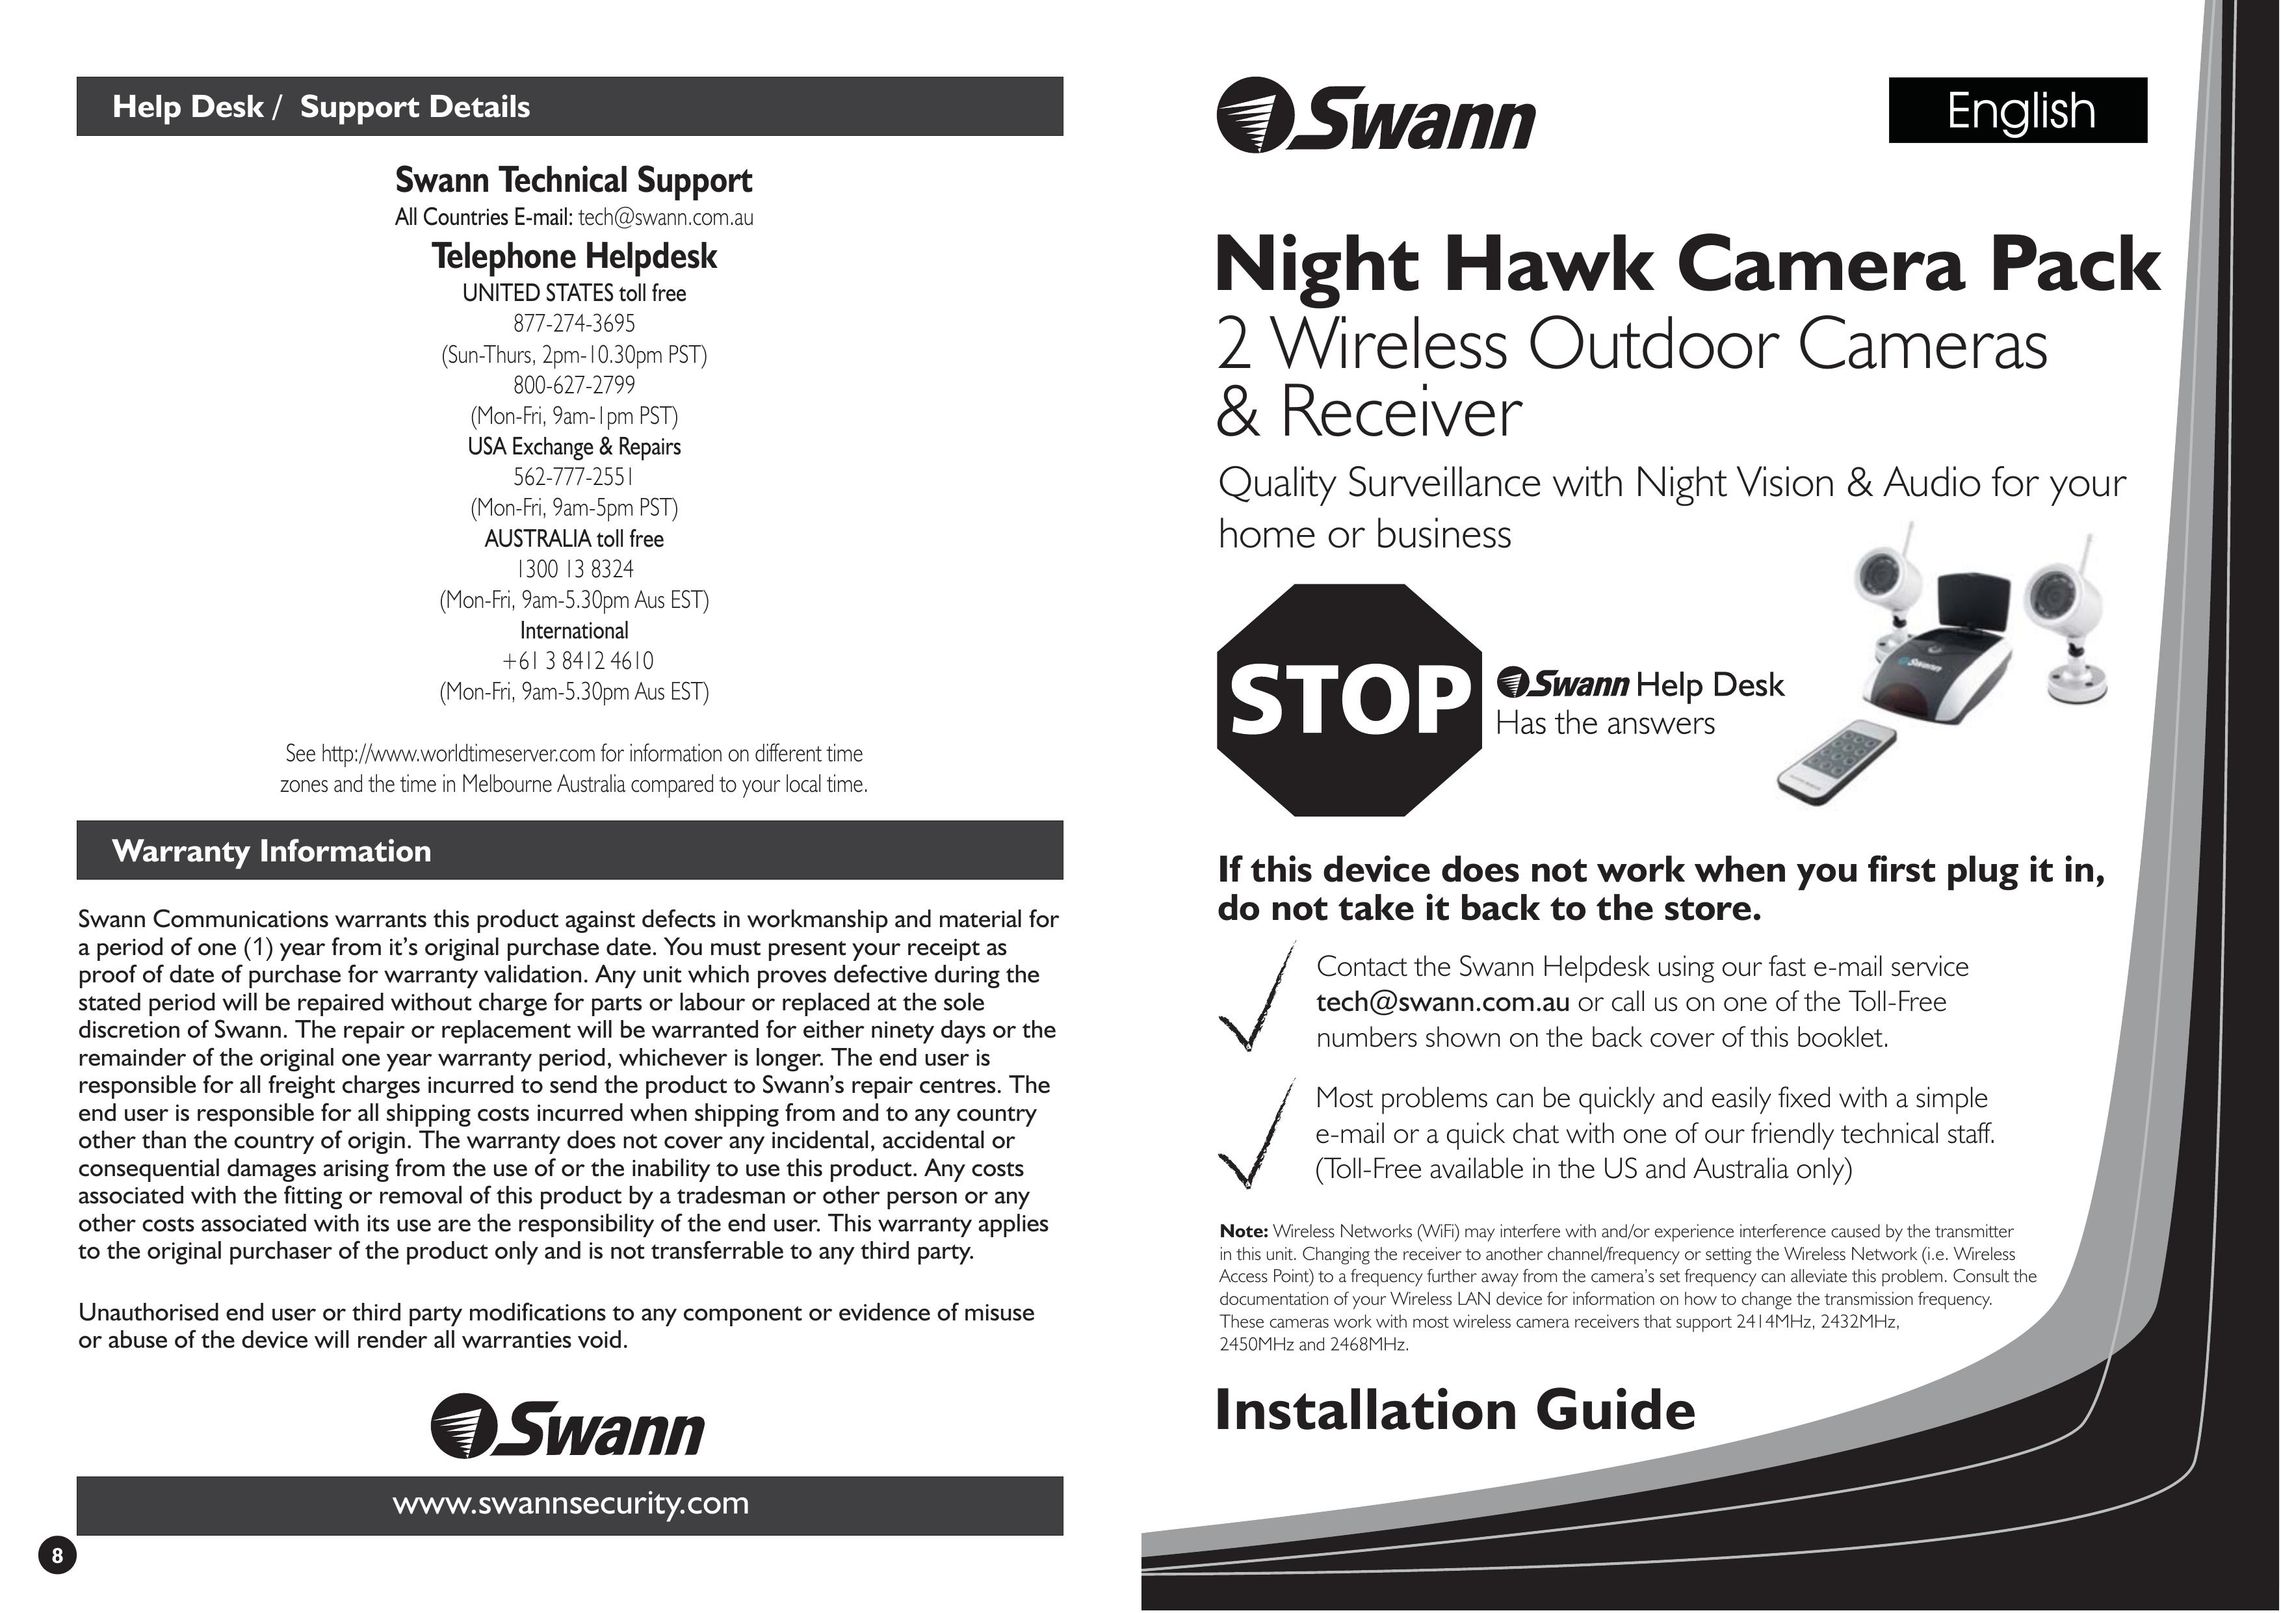 Swann Night Hawk Camera Pack Home Security System User Manual